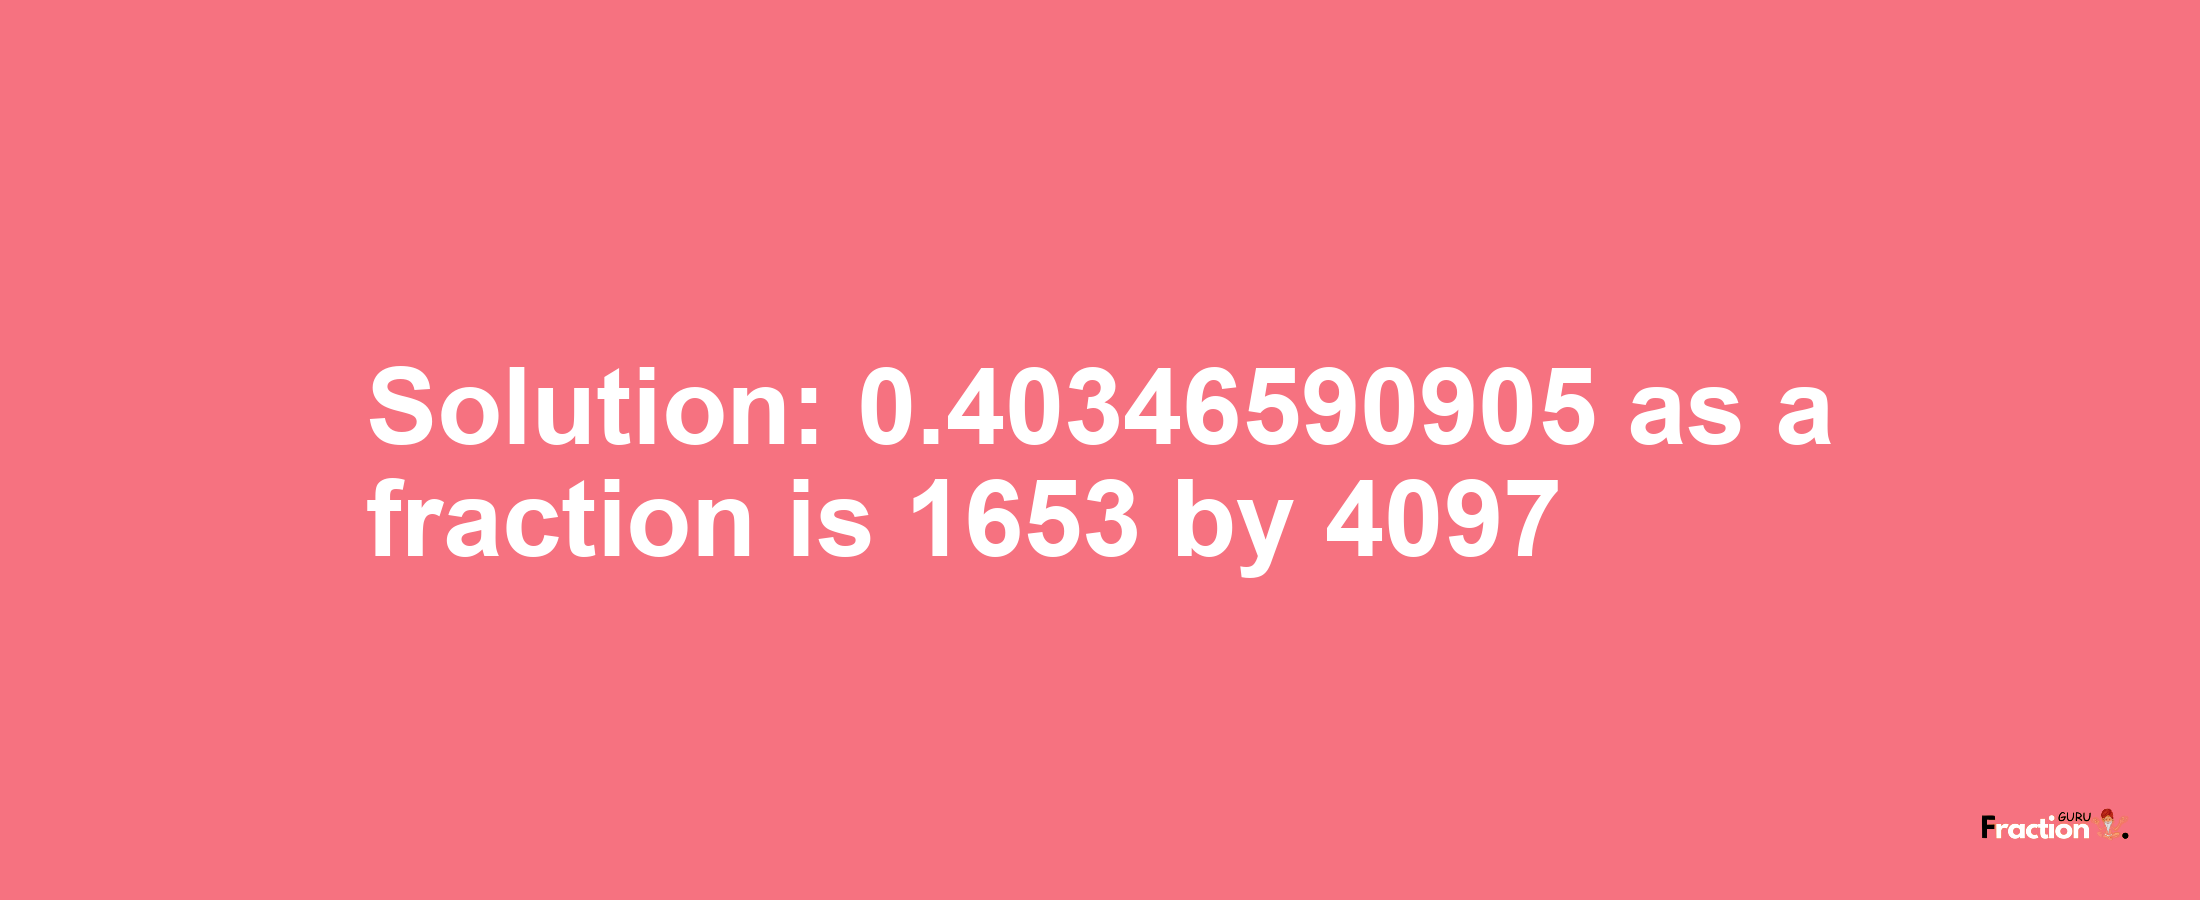 Solution:0.40346590905 as a fraction is 1653/4097